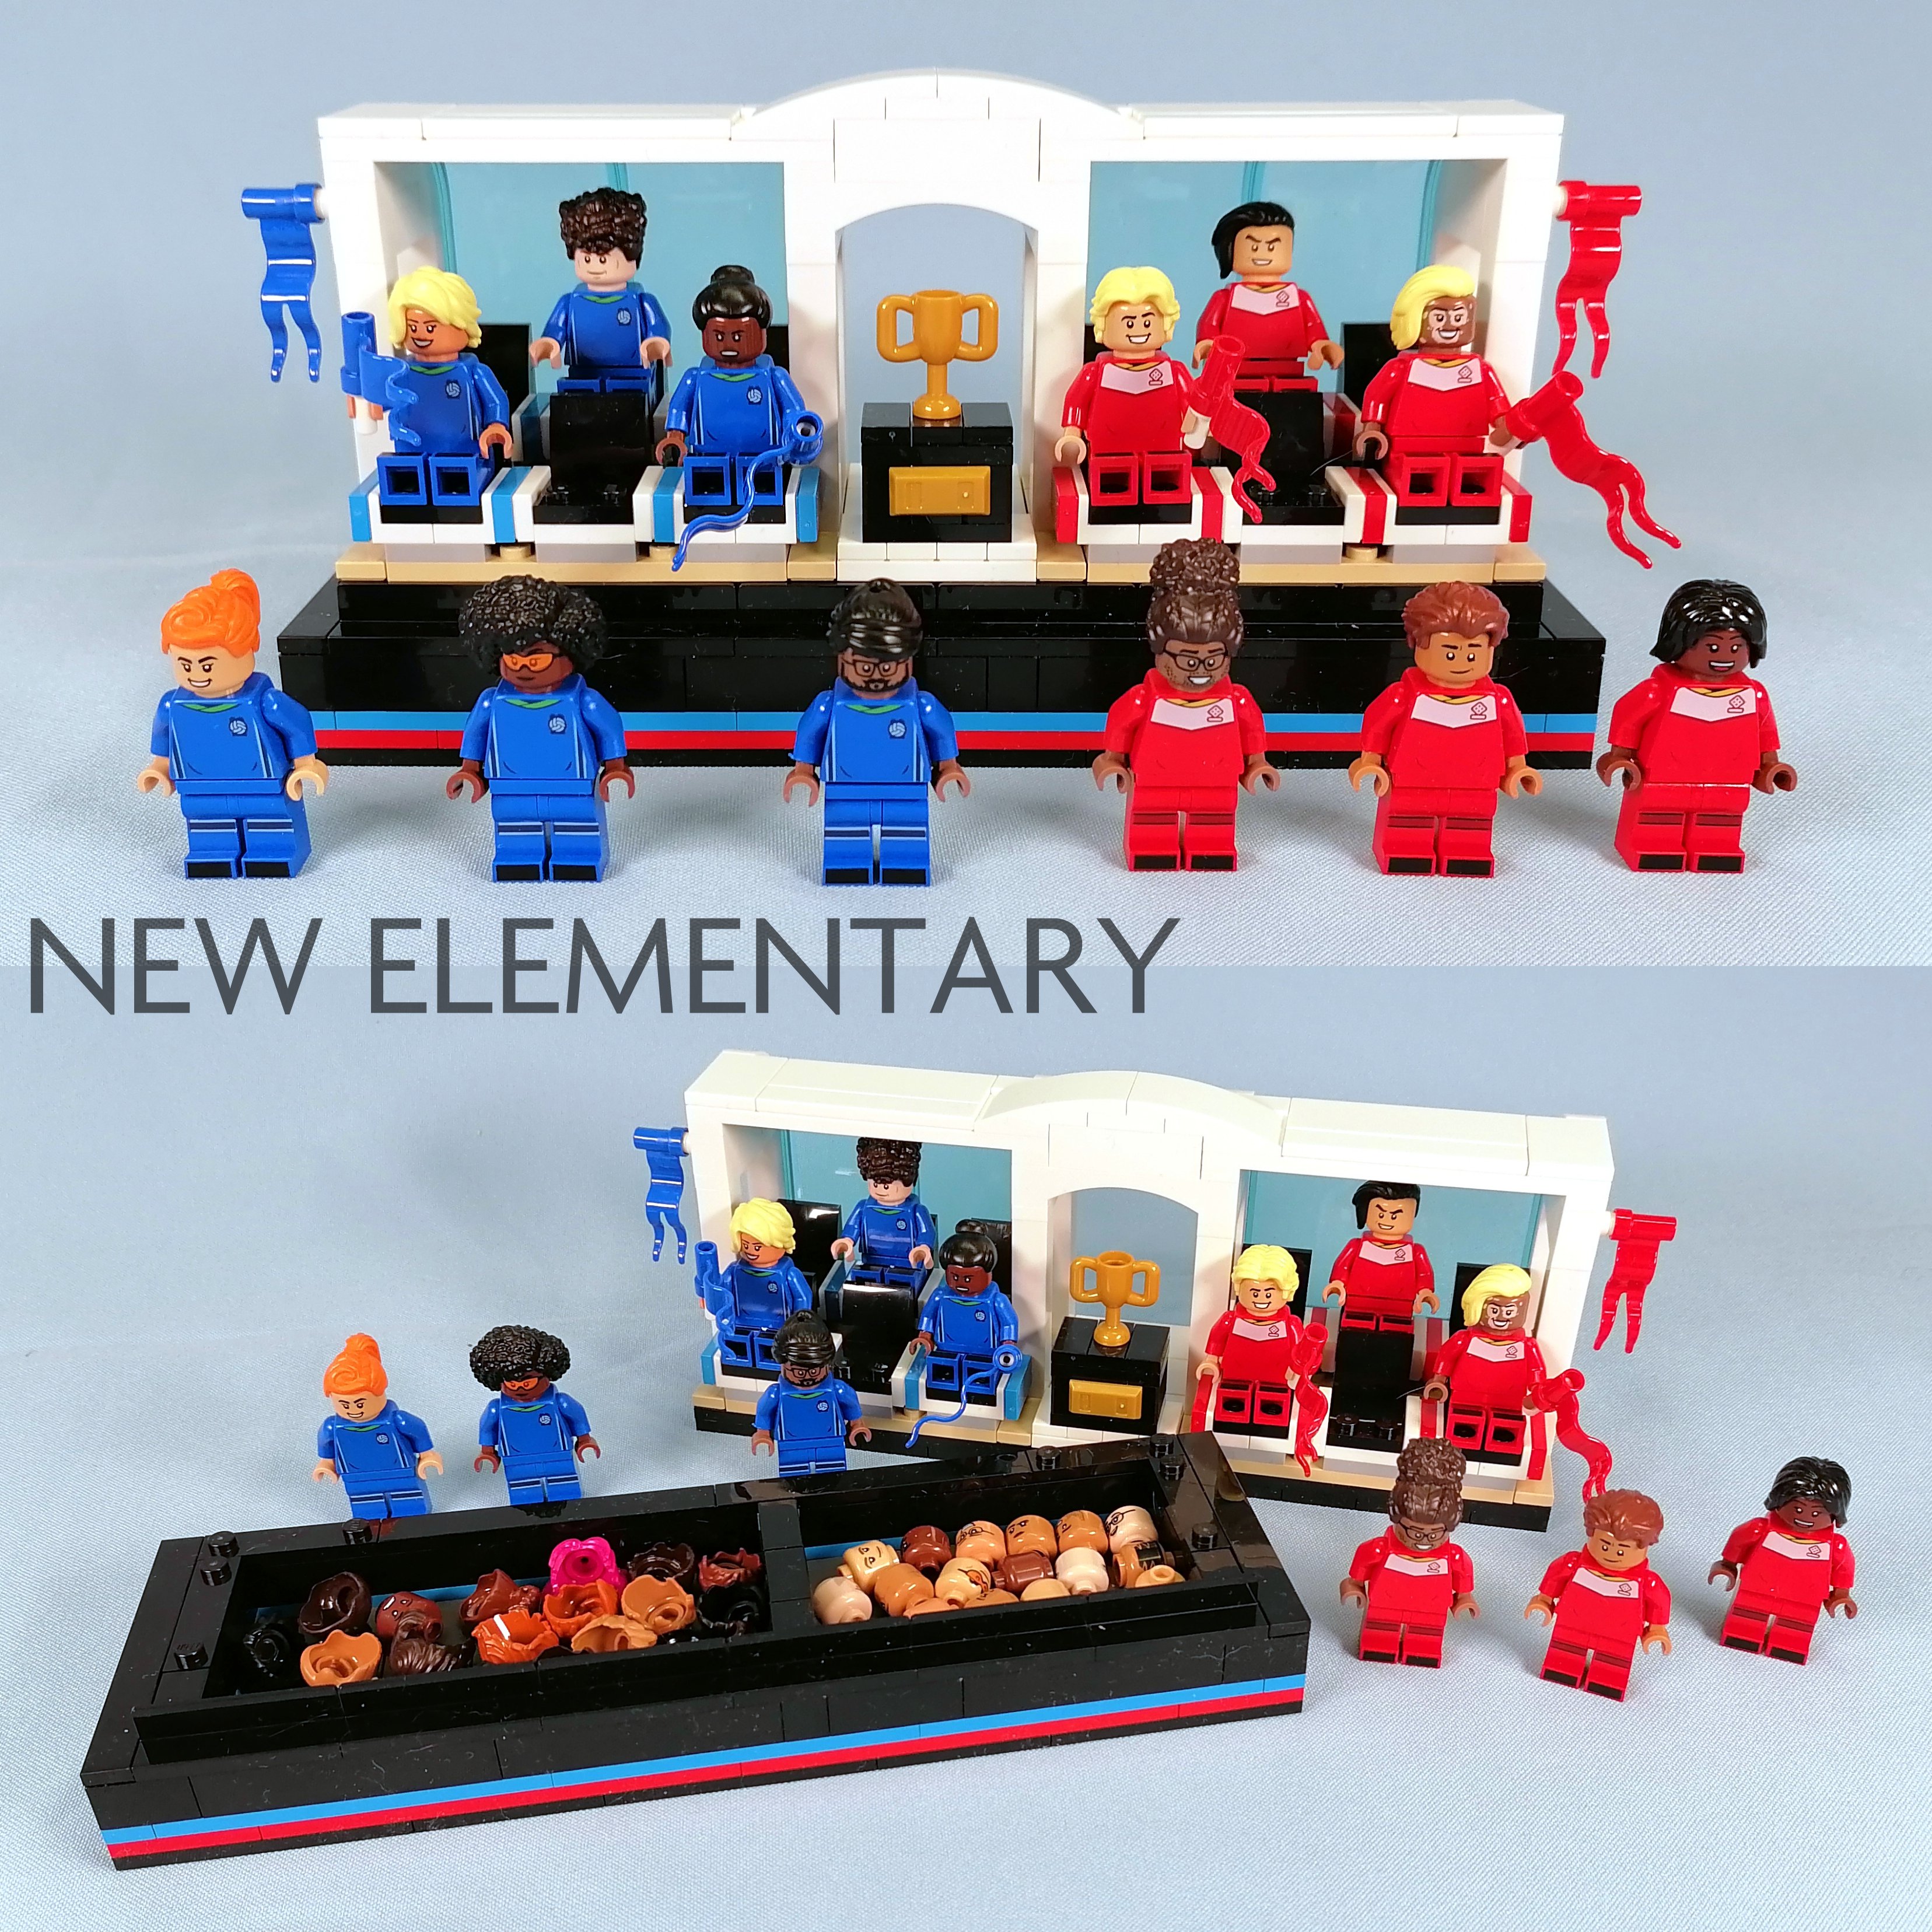 piece usage - Can Lego soccer (football) parts be used for